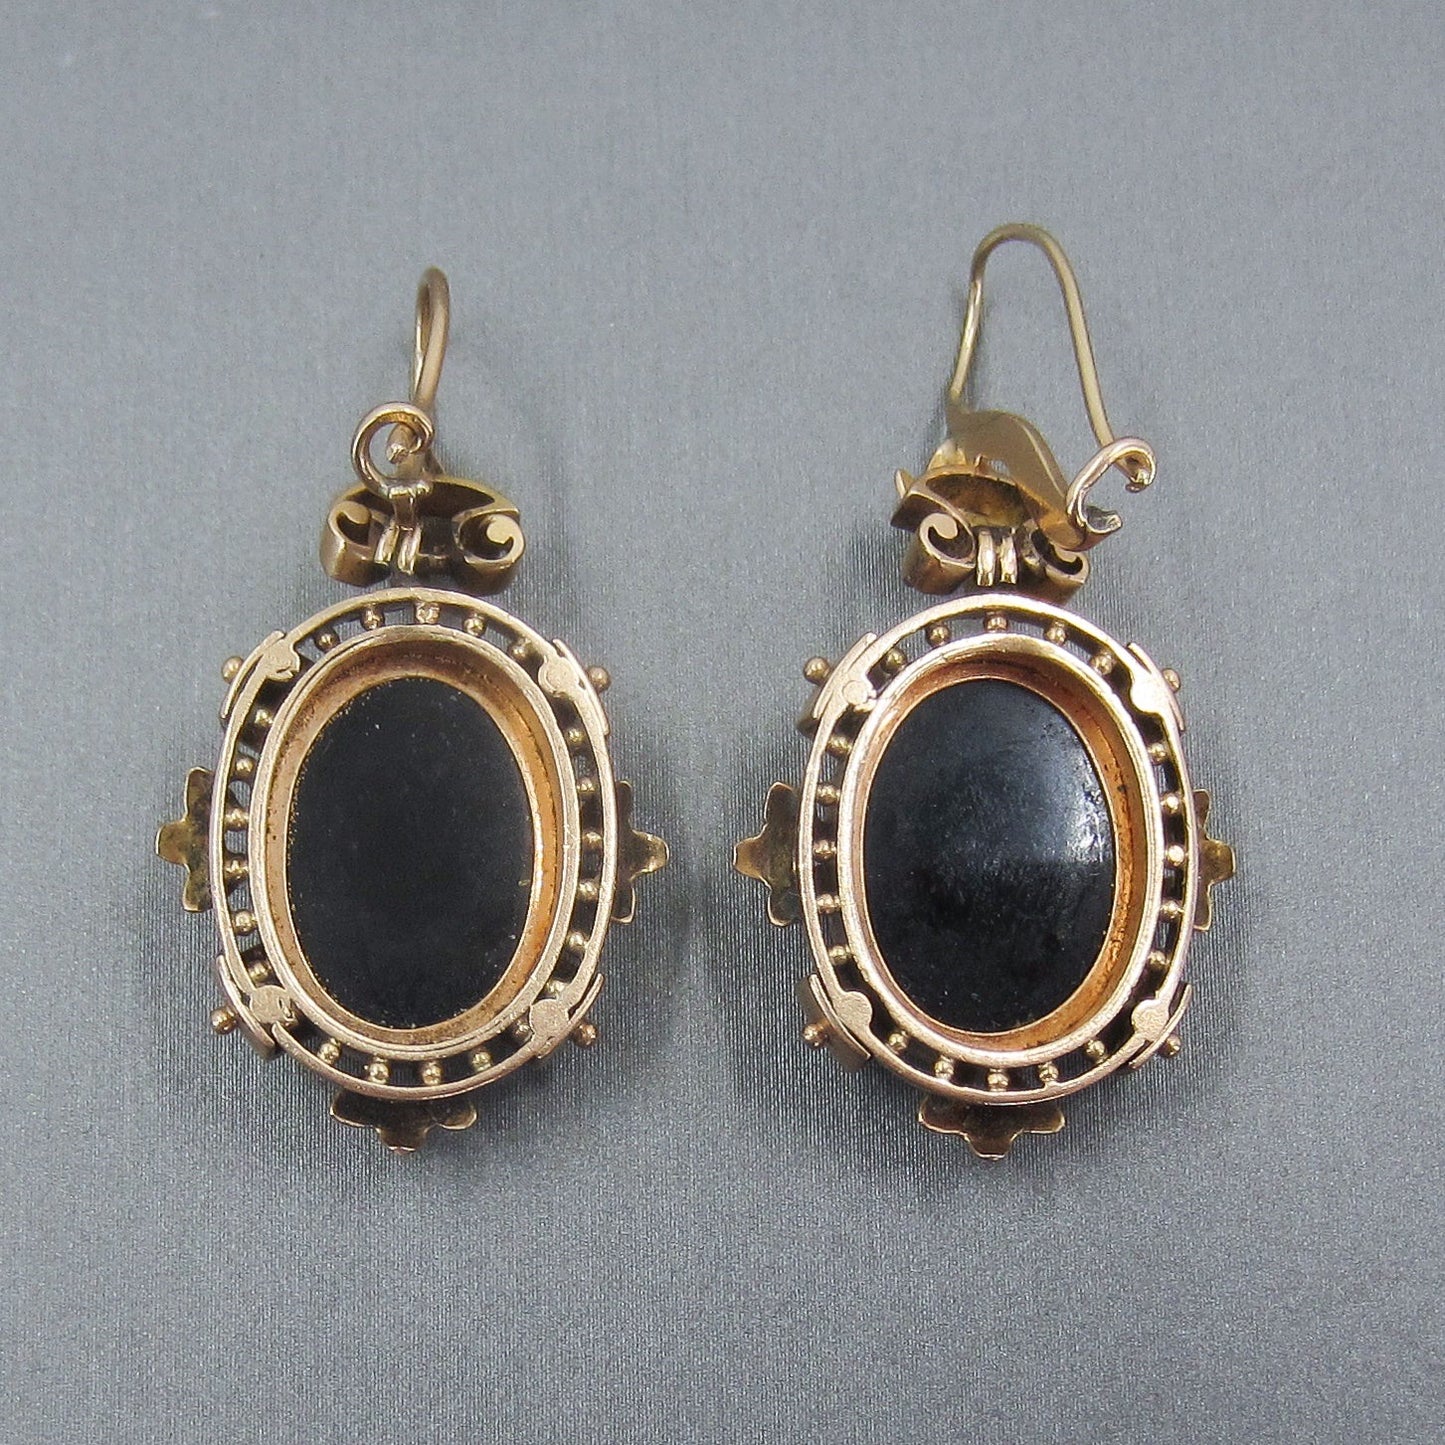 SOLD— Victorian Hardstone Cameo and Pearl Earrings 14k c. 1880